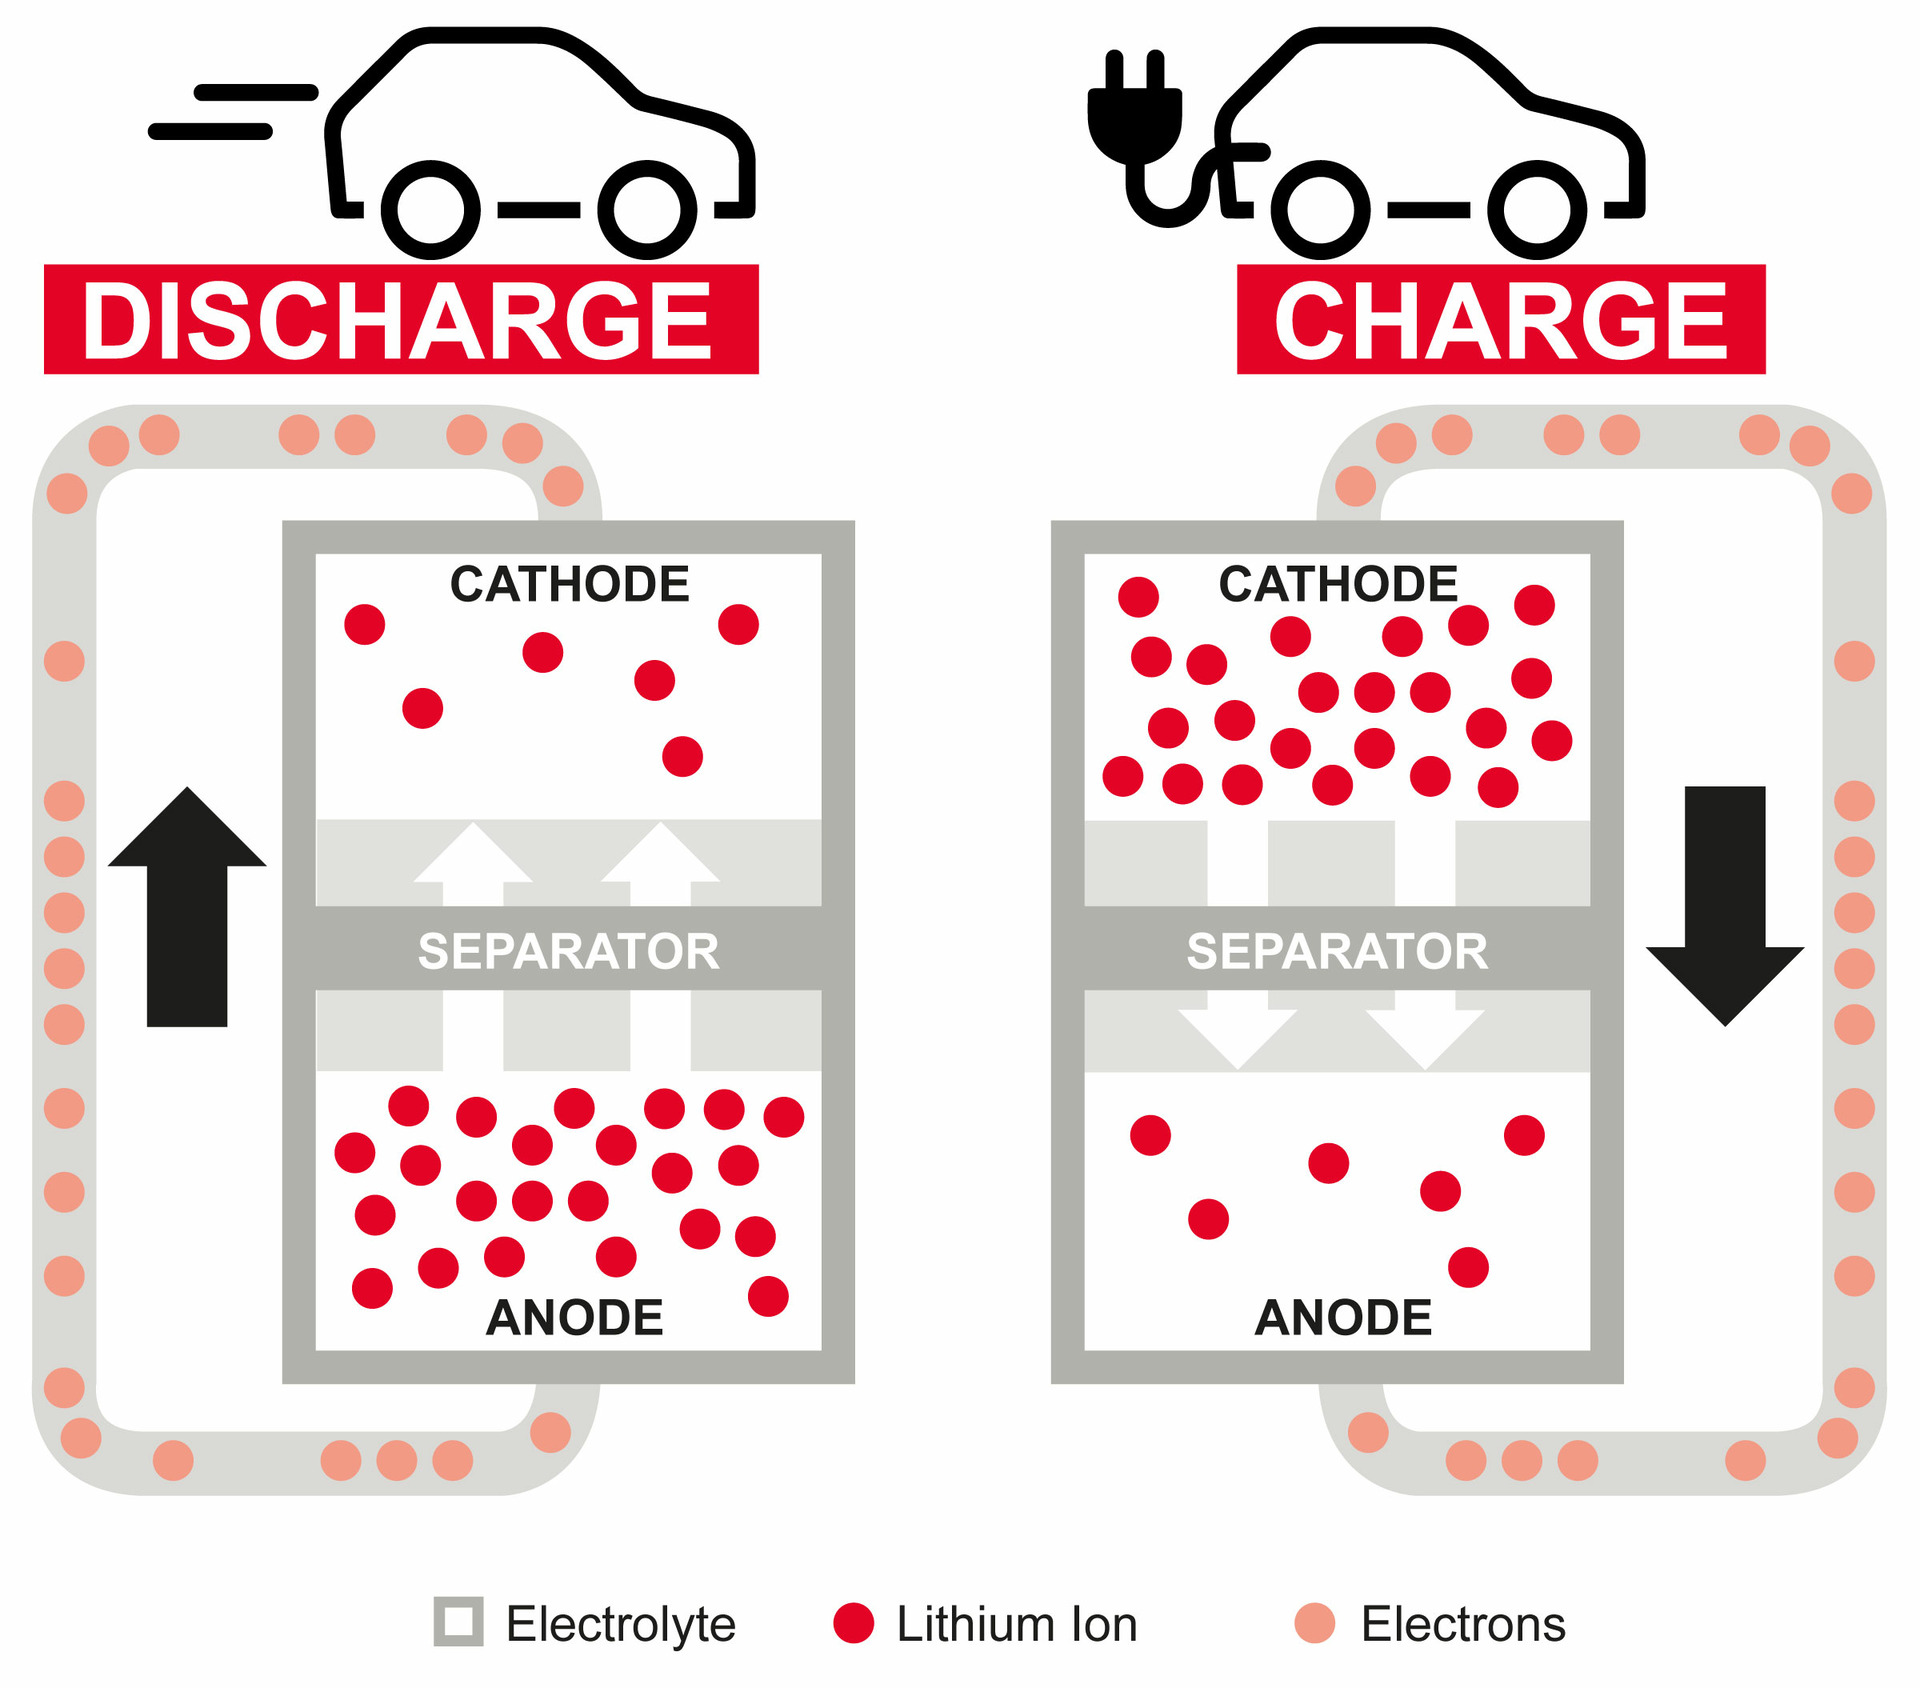 Info graphic about lithium ions in the charging and discharging process.